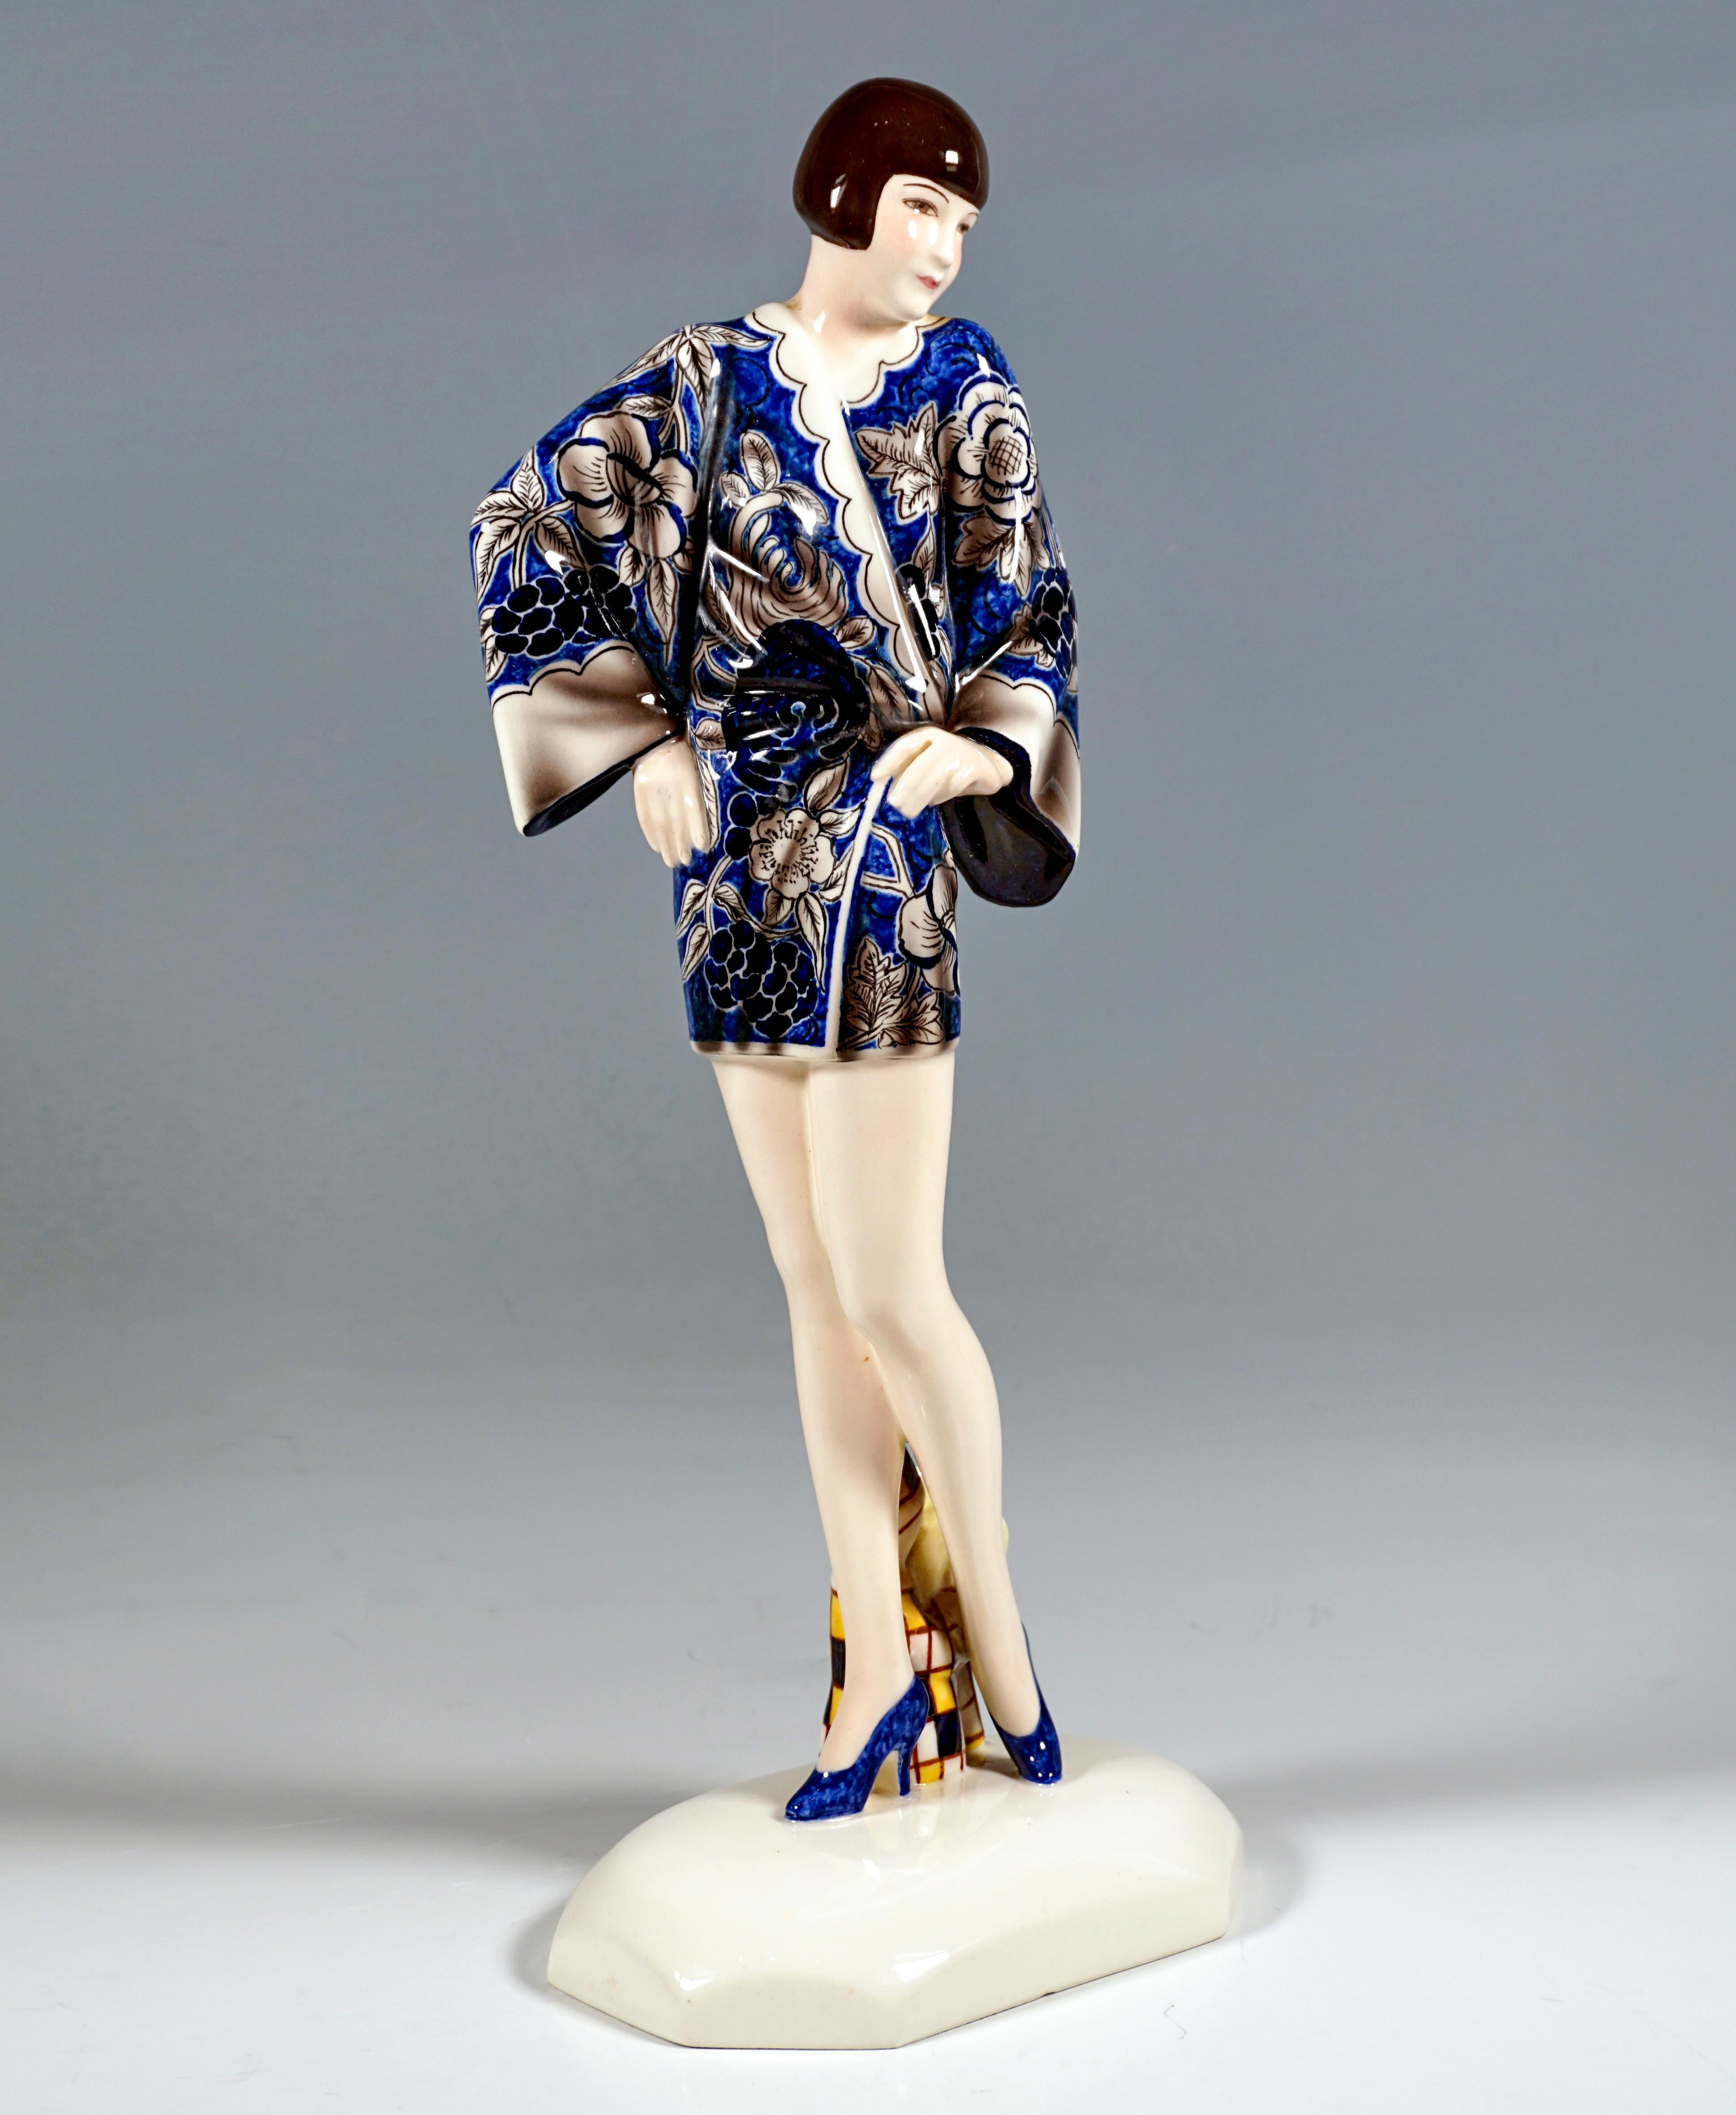 Excellent art ceramic figurine from the 1930s:
Young lady with bob hairstyle standing upright, torso turned to the left and supporting both arms on the hips, in a short blue kimono with a floral pattern and high heels. Behind her between the legs